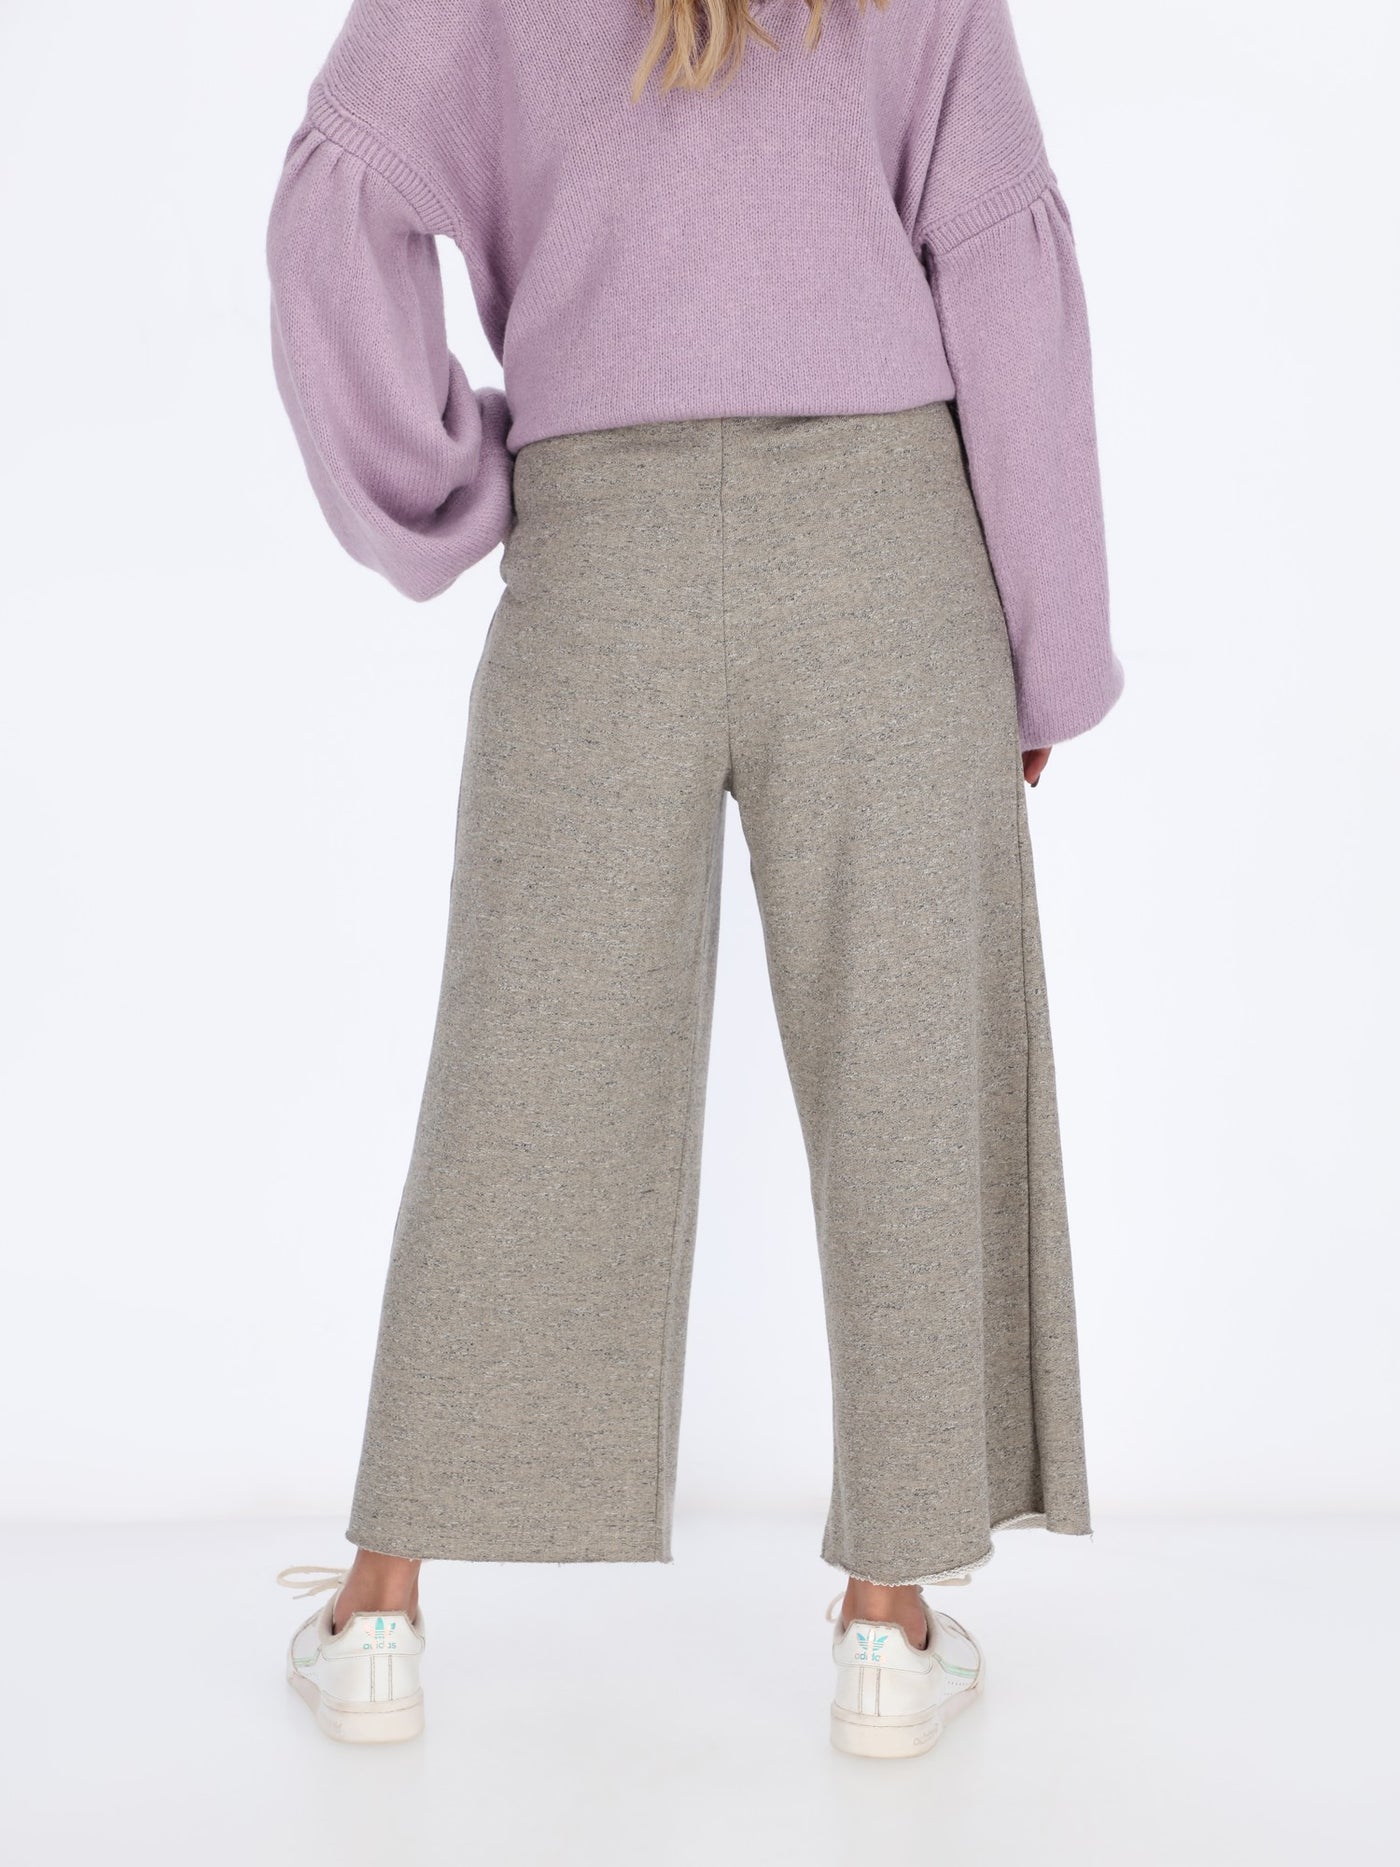 OR Women's Pleated Trousers